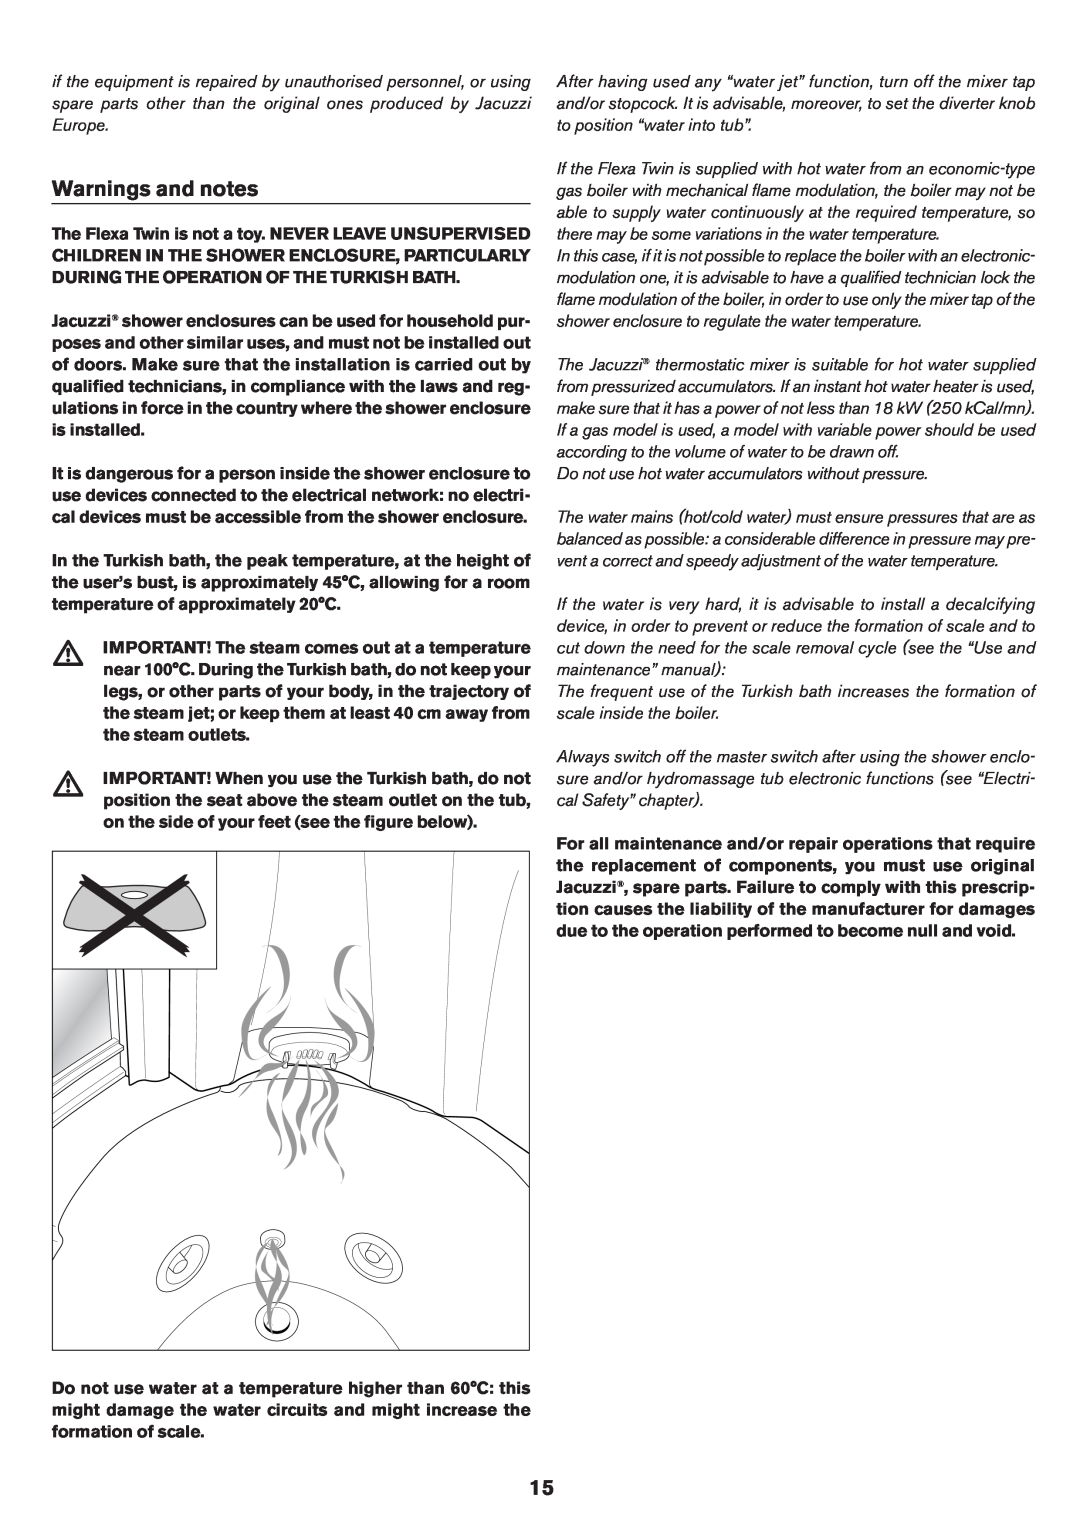 Jacuzzi ELT 10 installation manual Warnings and notes 